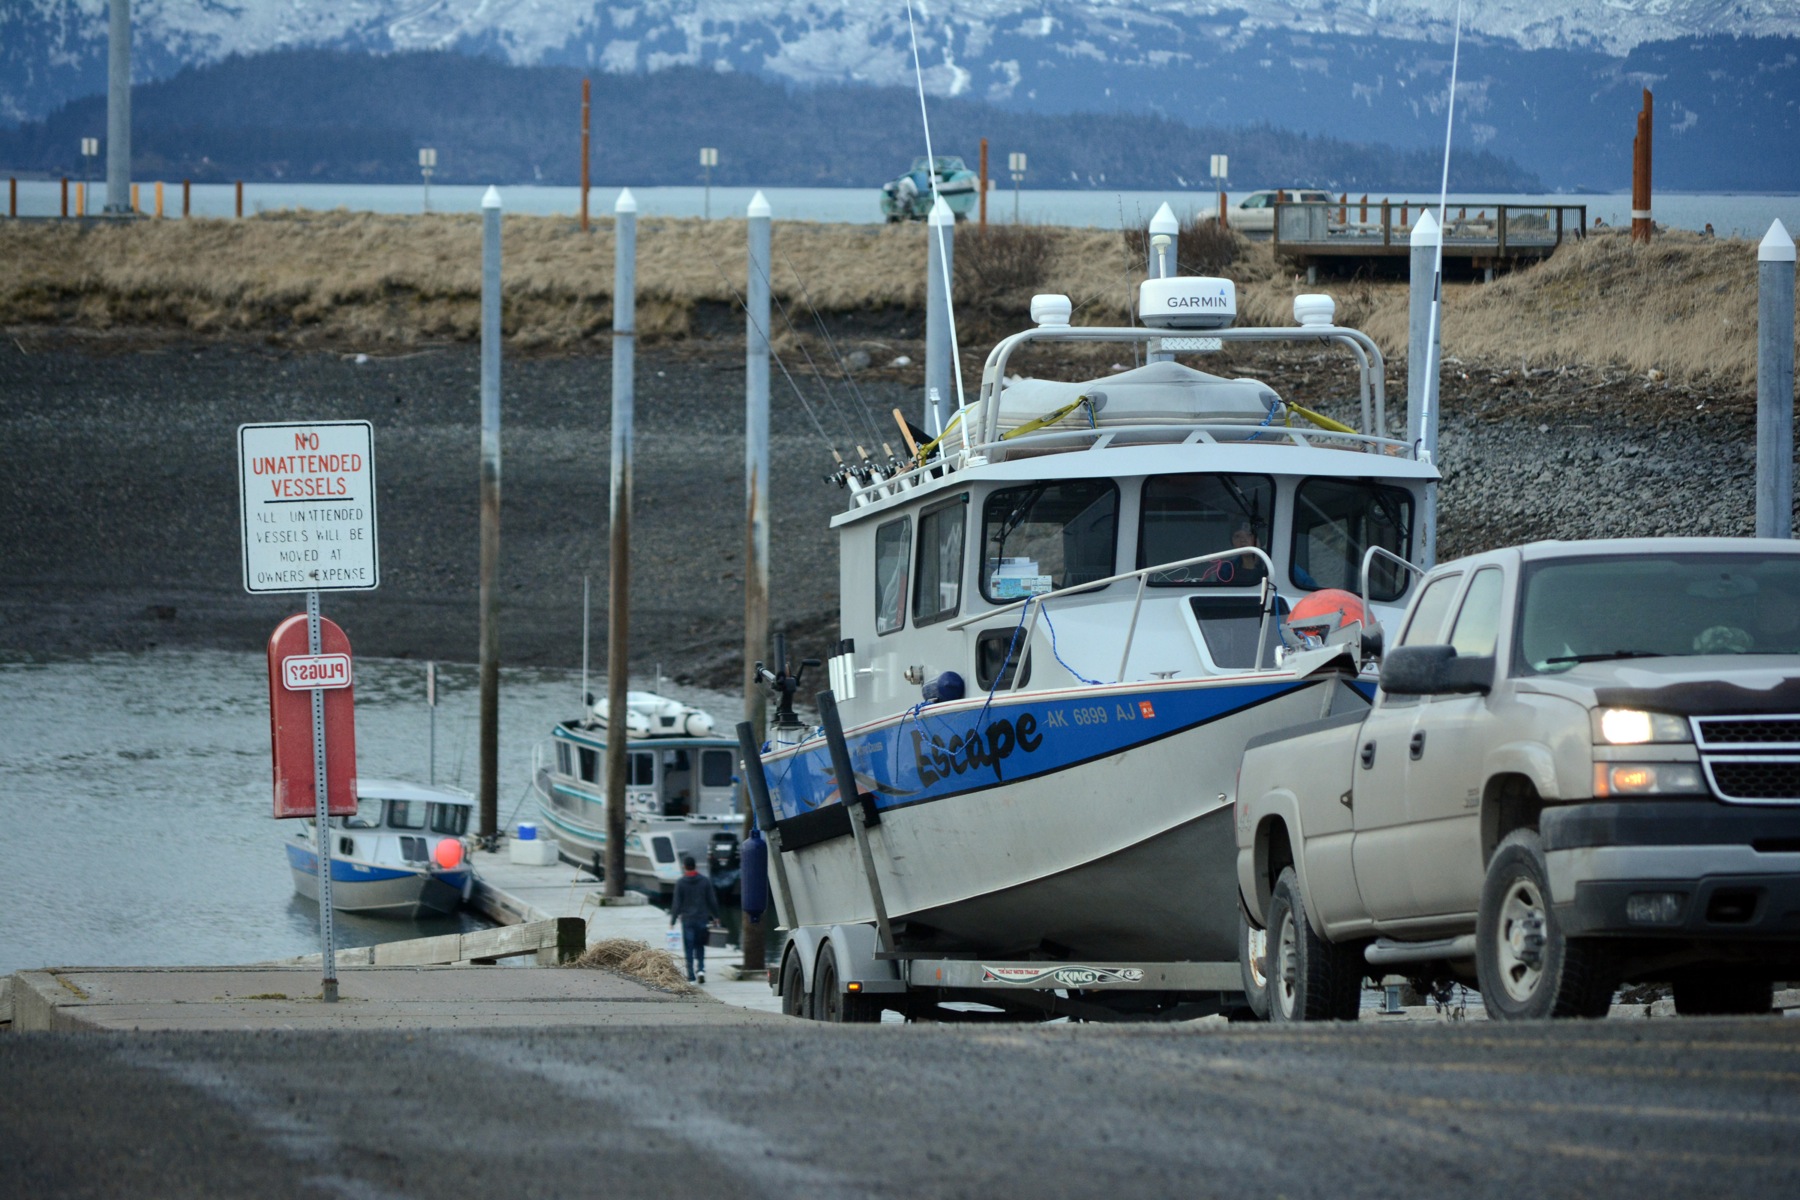 Fishermen launch their boats at the Homer Harbor on Friday morning. All lanes at the load-launch ramp were occupied and others waited to get a start on fishing.-Photo by Michael Armstrong, Homer News